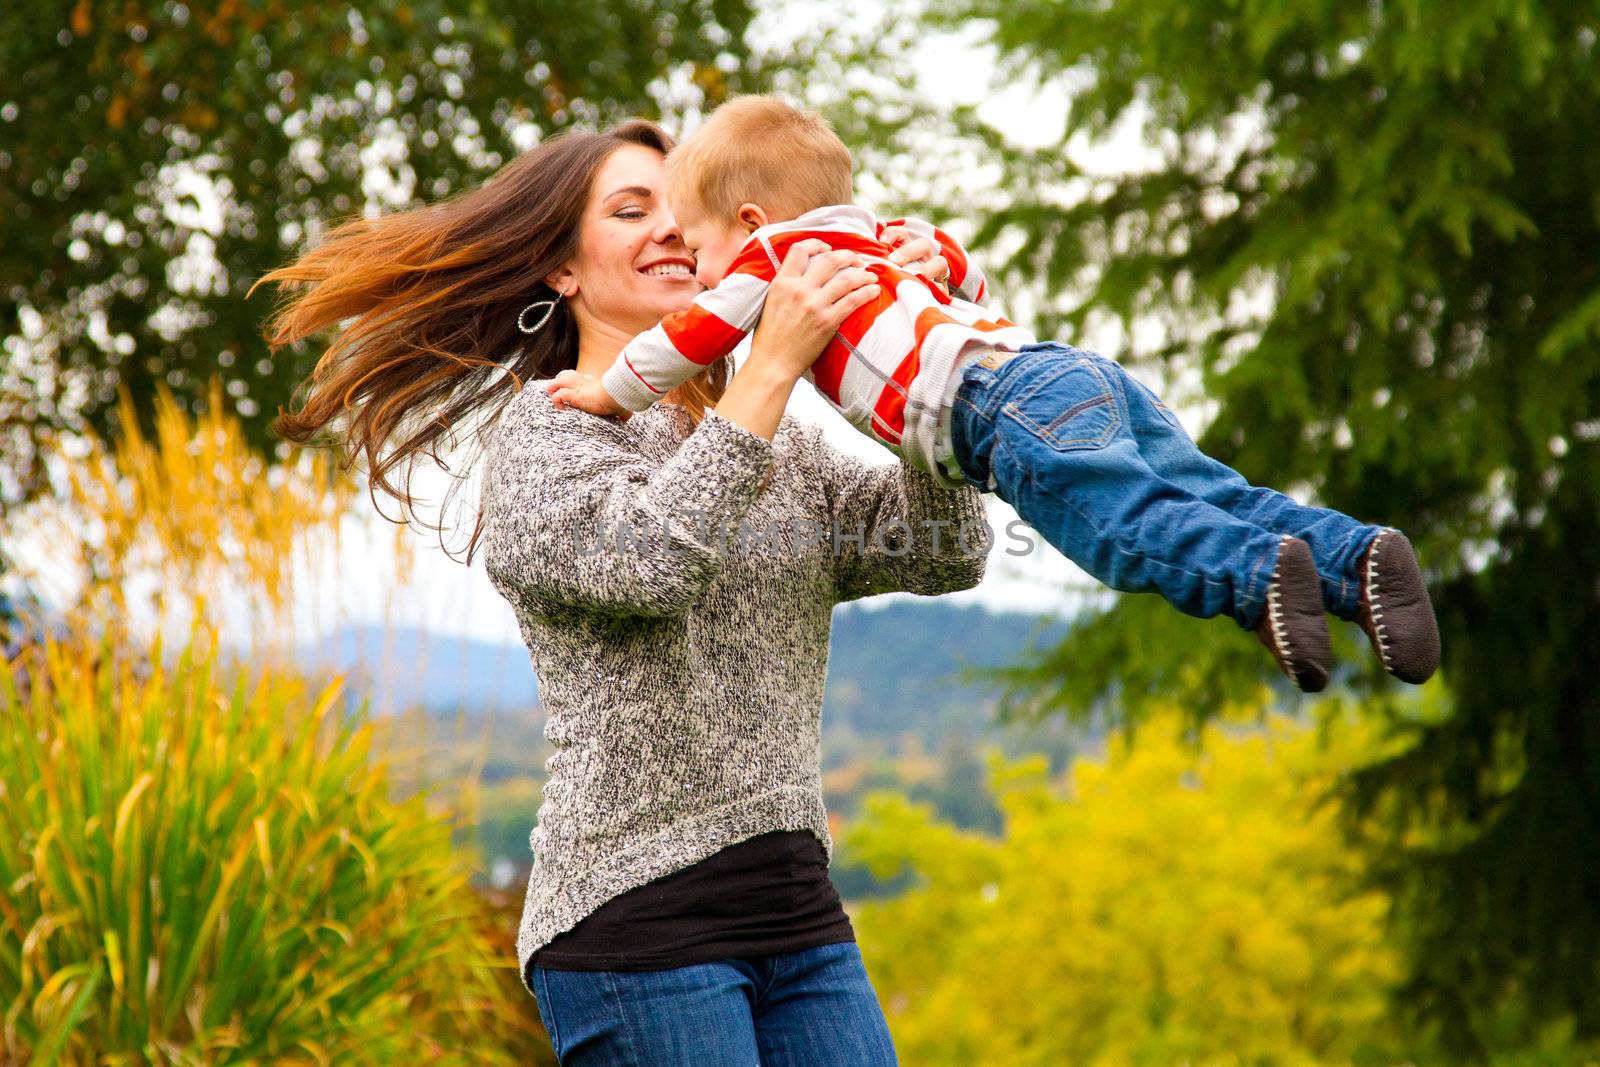 A woman spins her child around while holding him in the air in this joyous happy moment.